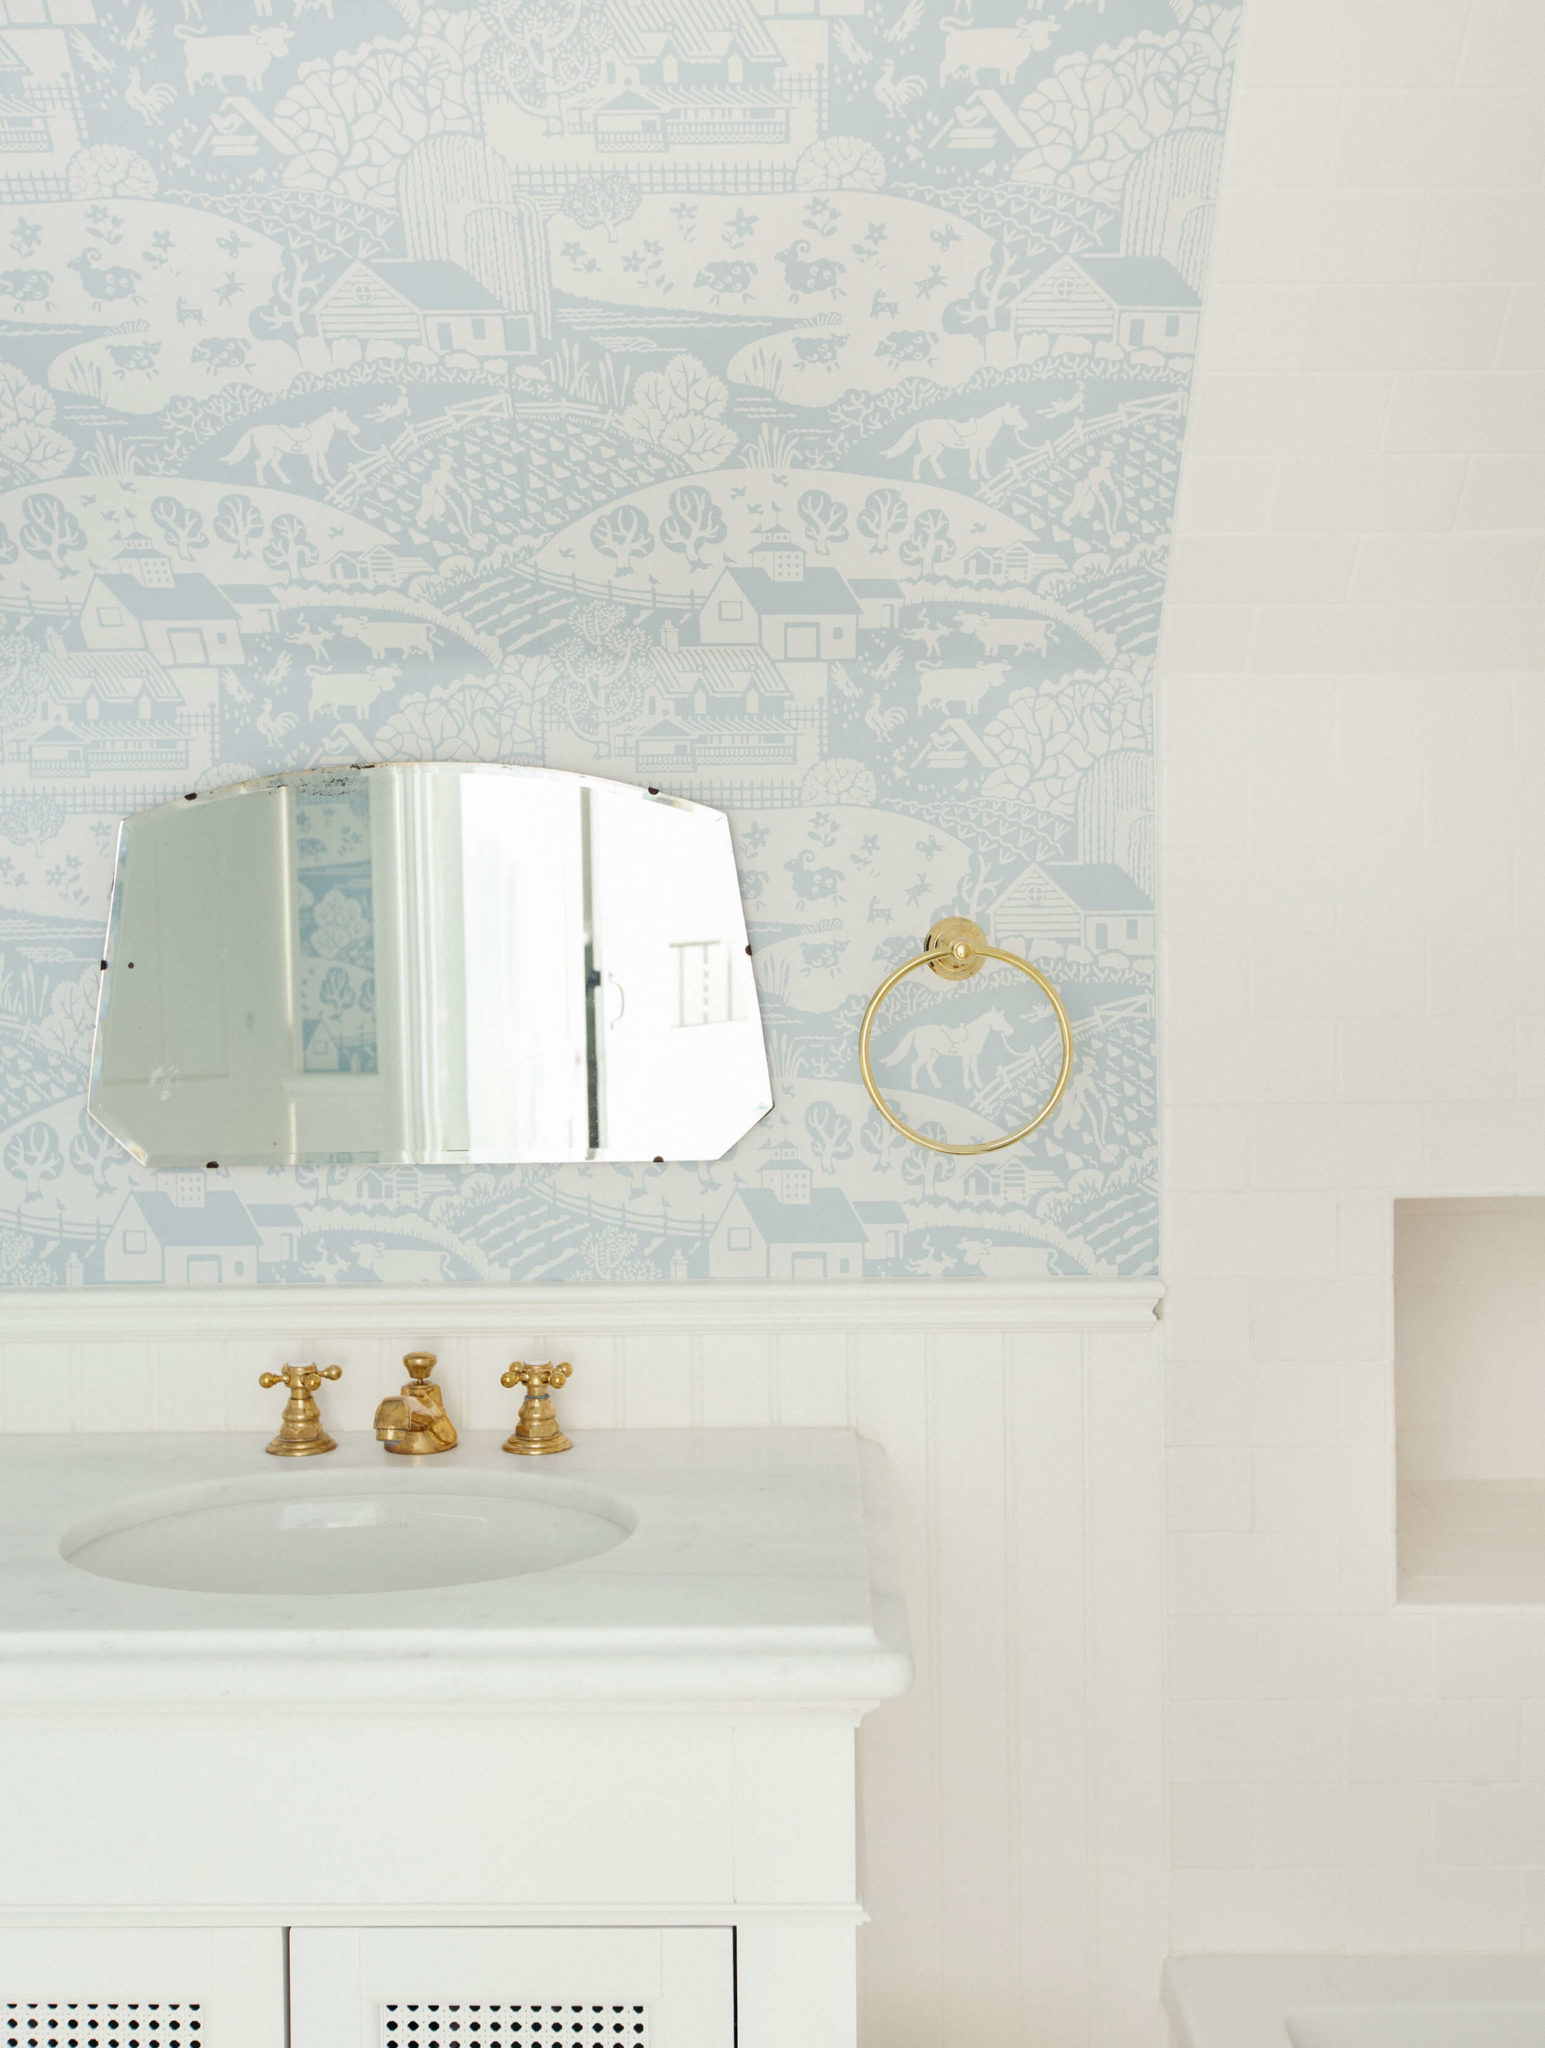 Jack and Jill bathroom from Emily Henderson